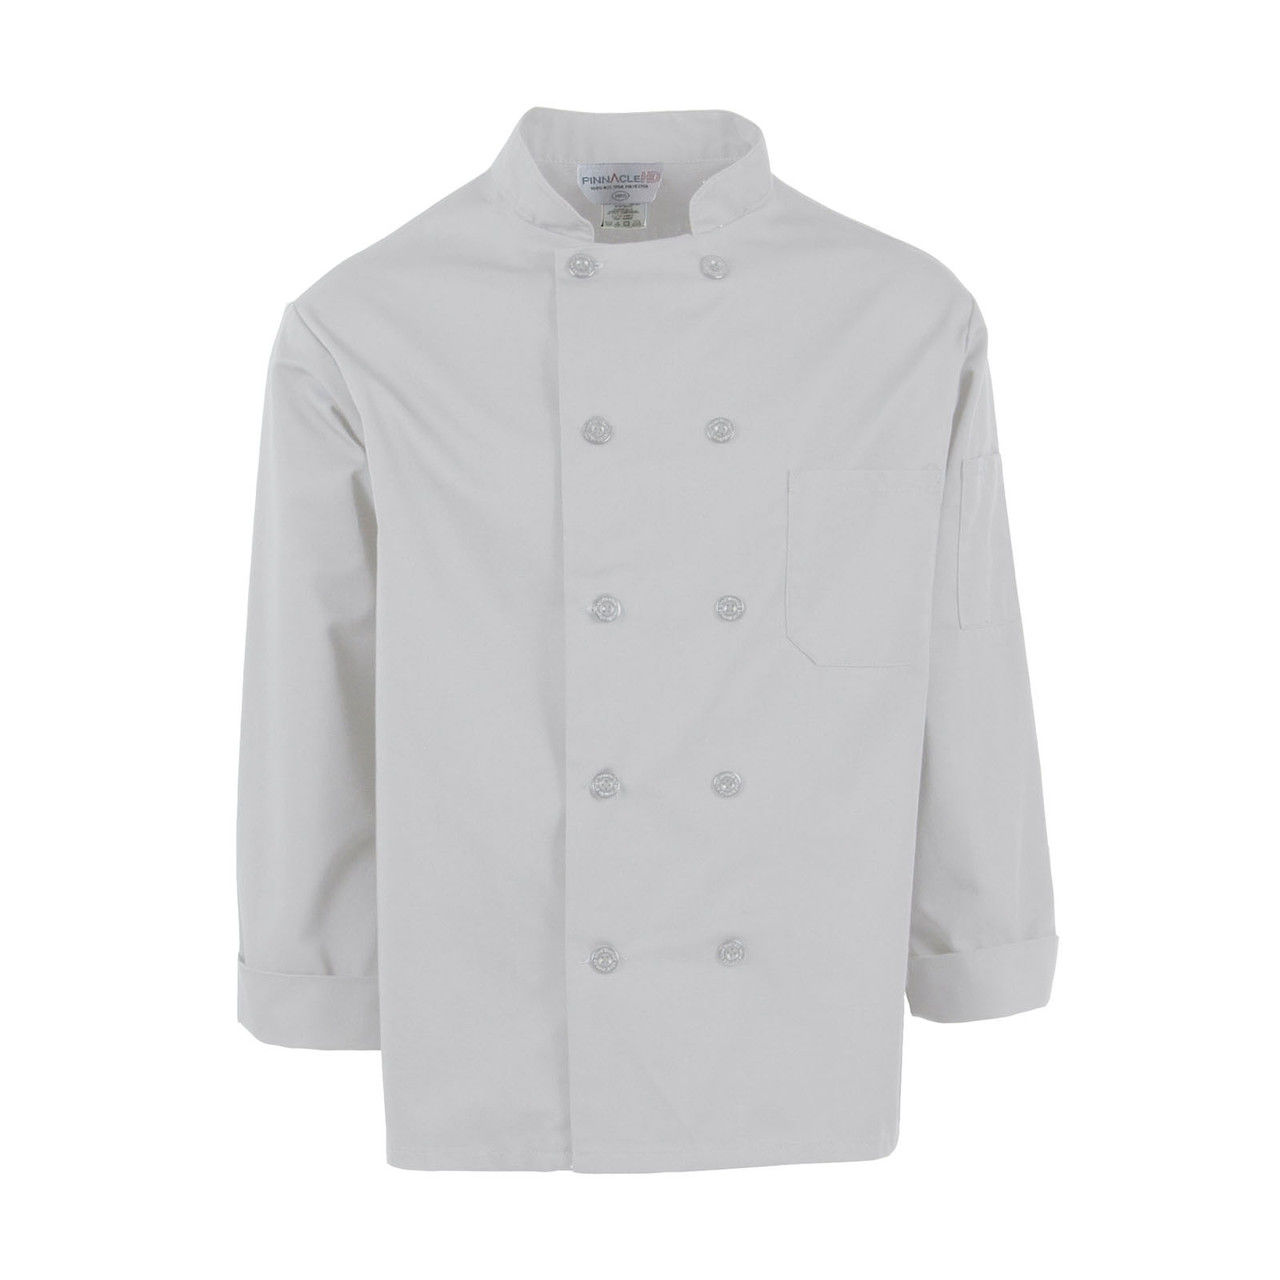 Does the design purpose of the chef coat involve pinnacle buttons?